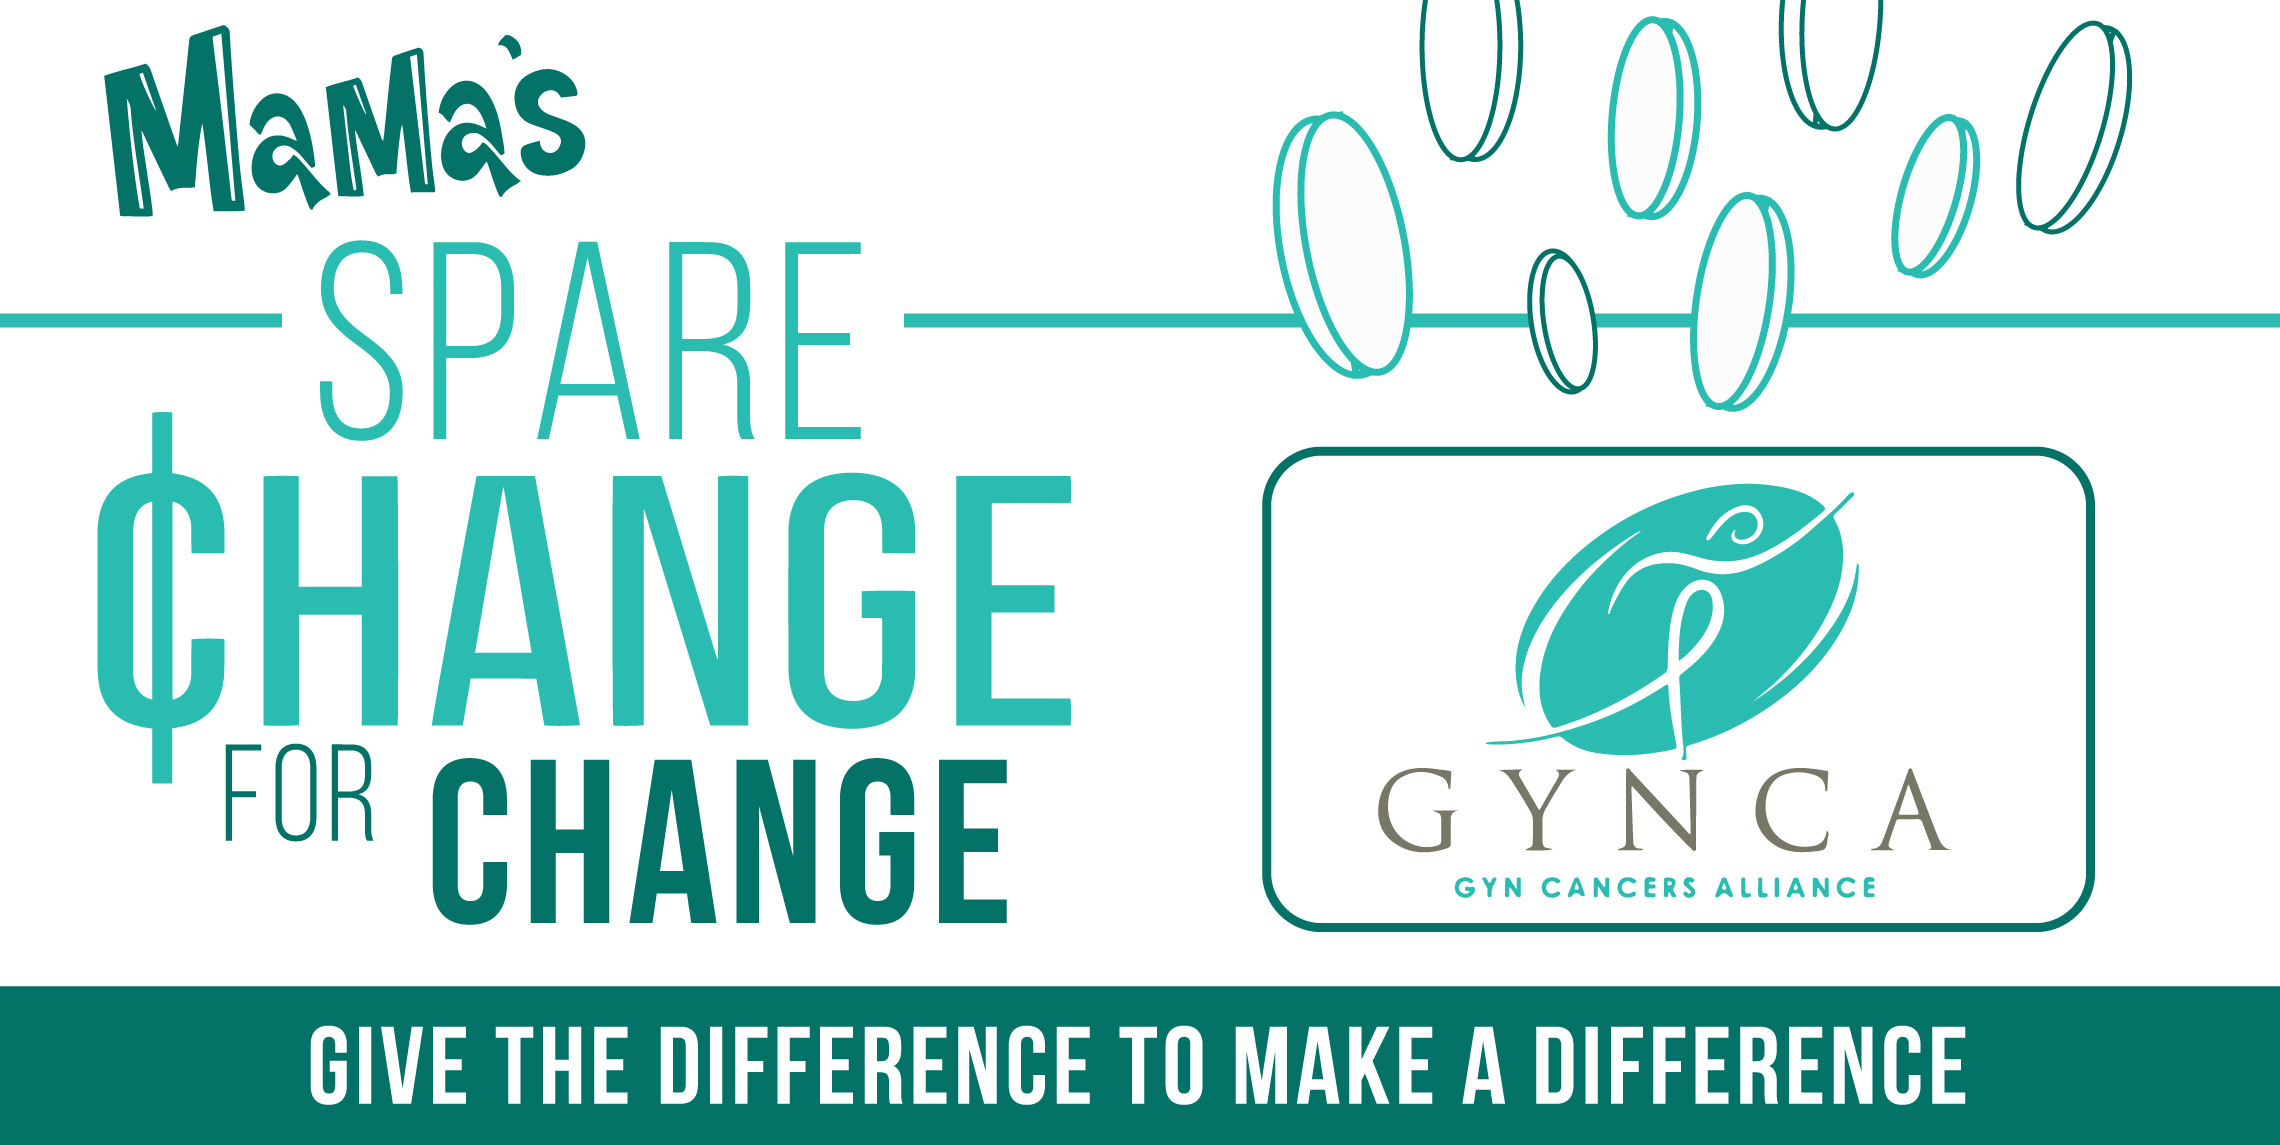 Change for Change GYNCA